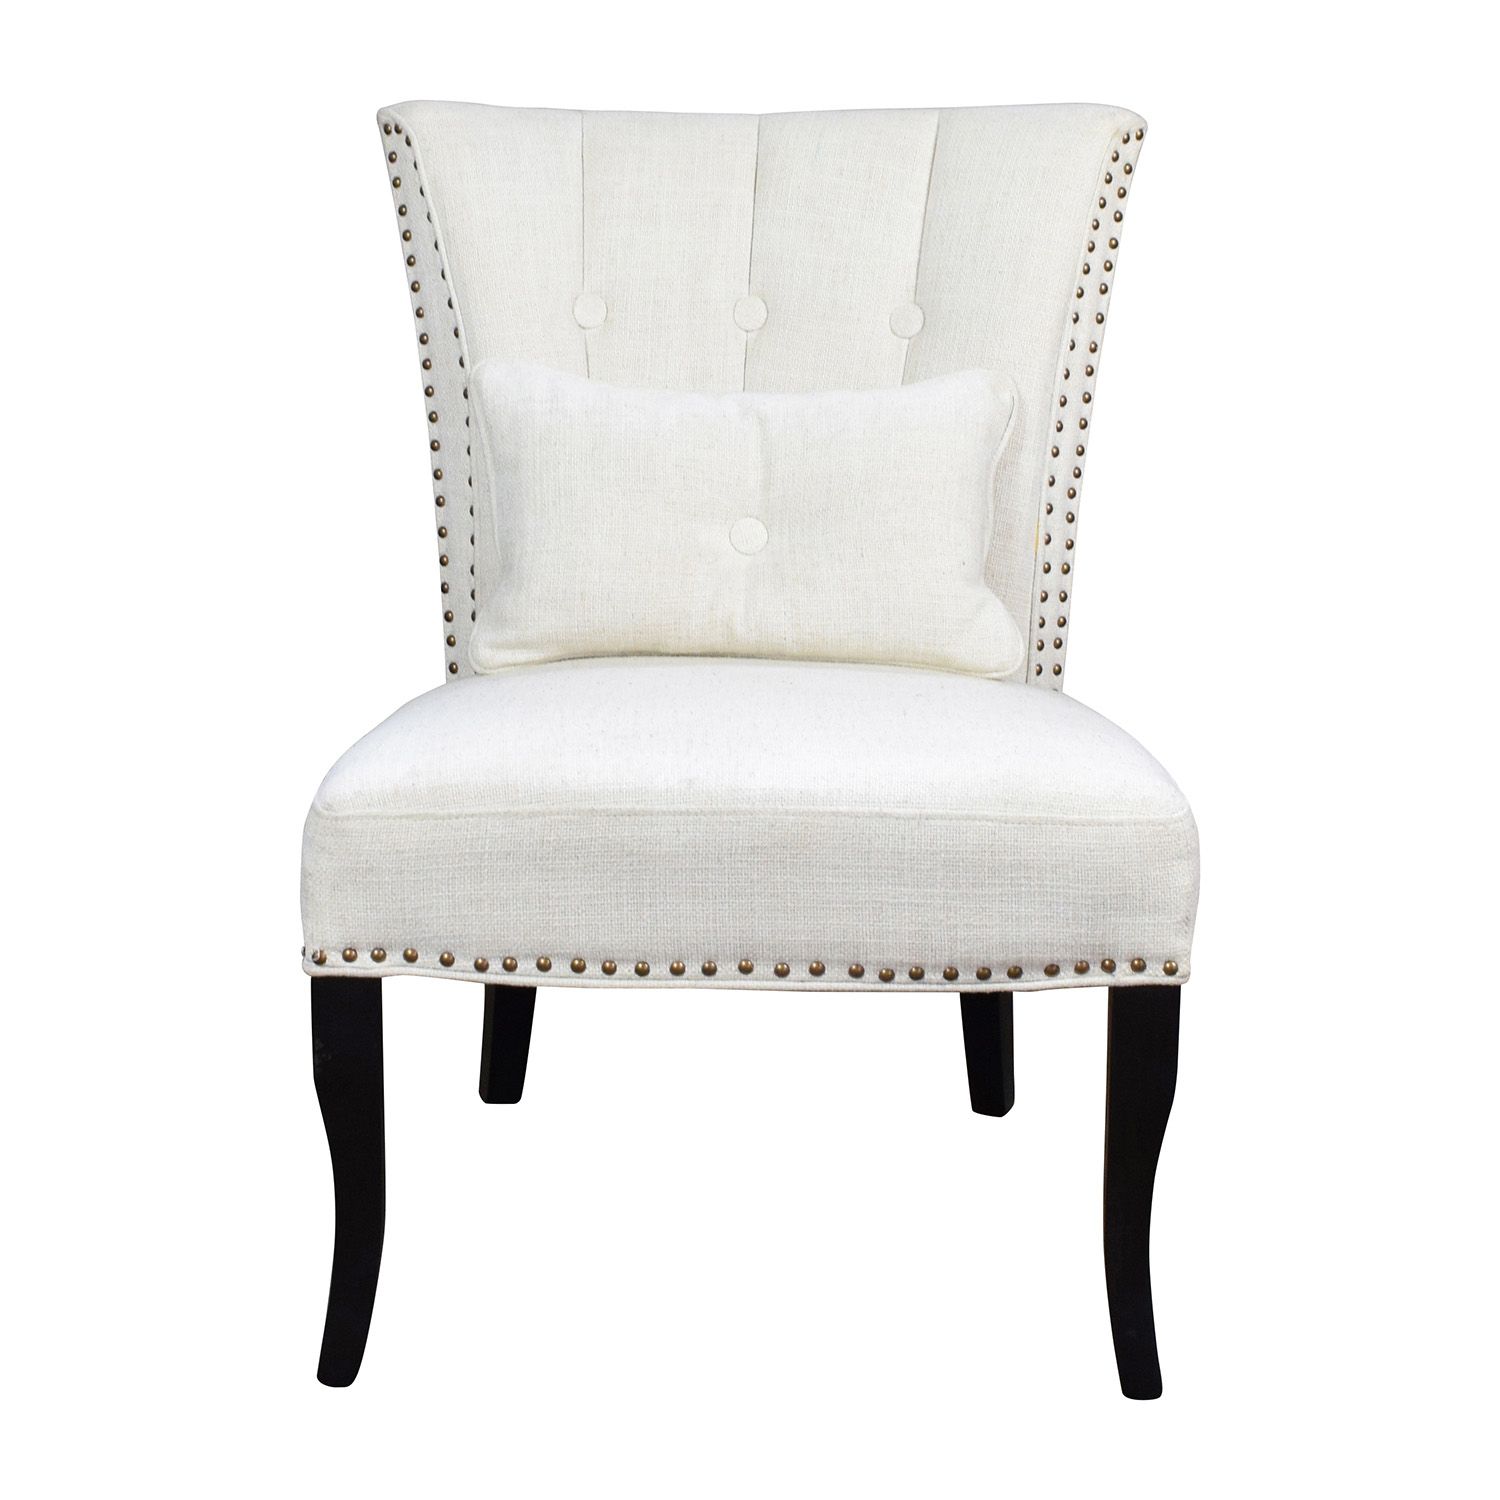 66% Off – White Tufted Accent Chair / Chairs Within White Textured Round Accent Stools (View 12 of 20)